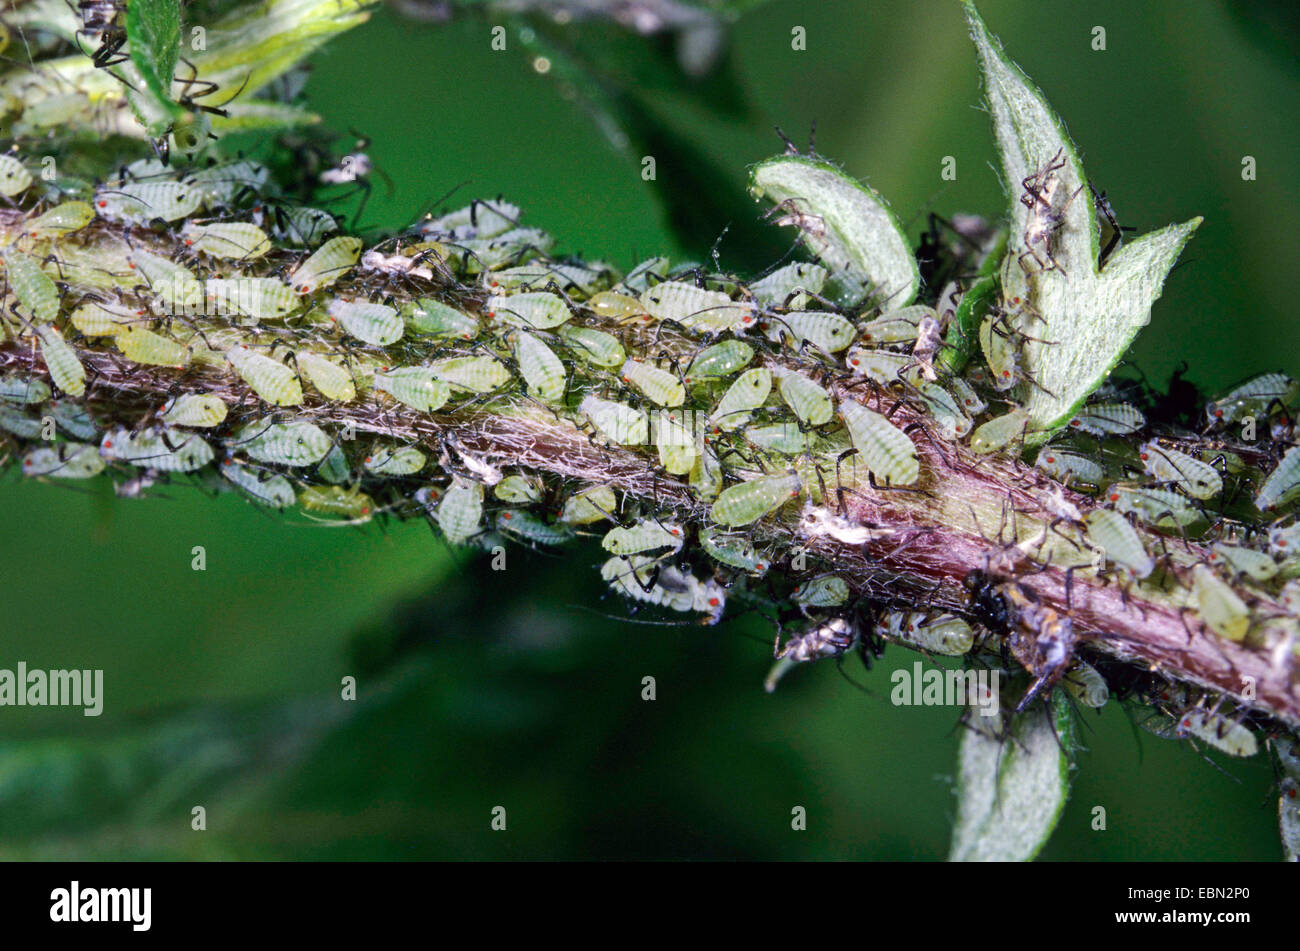 aphids and greenflies etc. (Aphidoidea), aphids at mugwort, Artemisia vulgaris, Germany Stock Photo